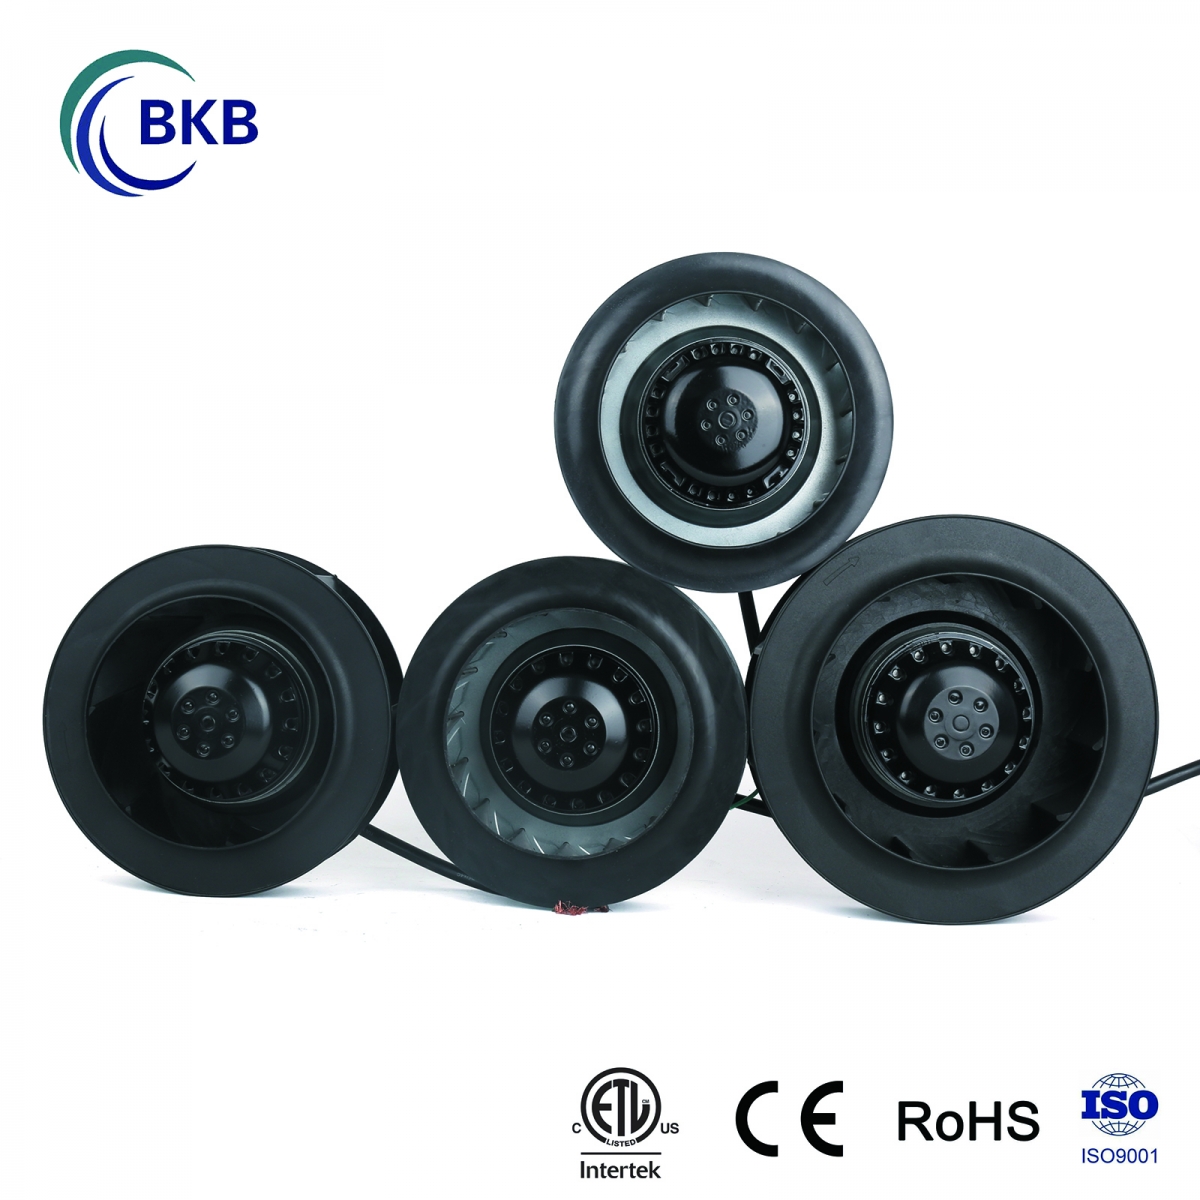 How to achieve high-density planting in a limited space?-SUNLIGHT BLOWER,Centrifugal Fans, Inline Fans,Motors,Backward curved centrifugal fans ,Forward curved centrifugal fans ,inlet fans, EC fans